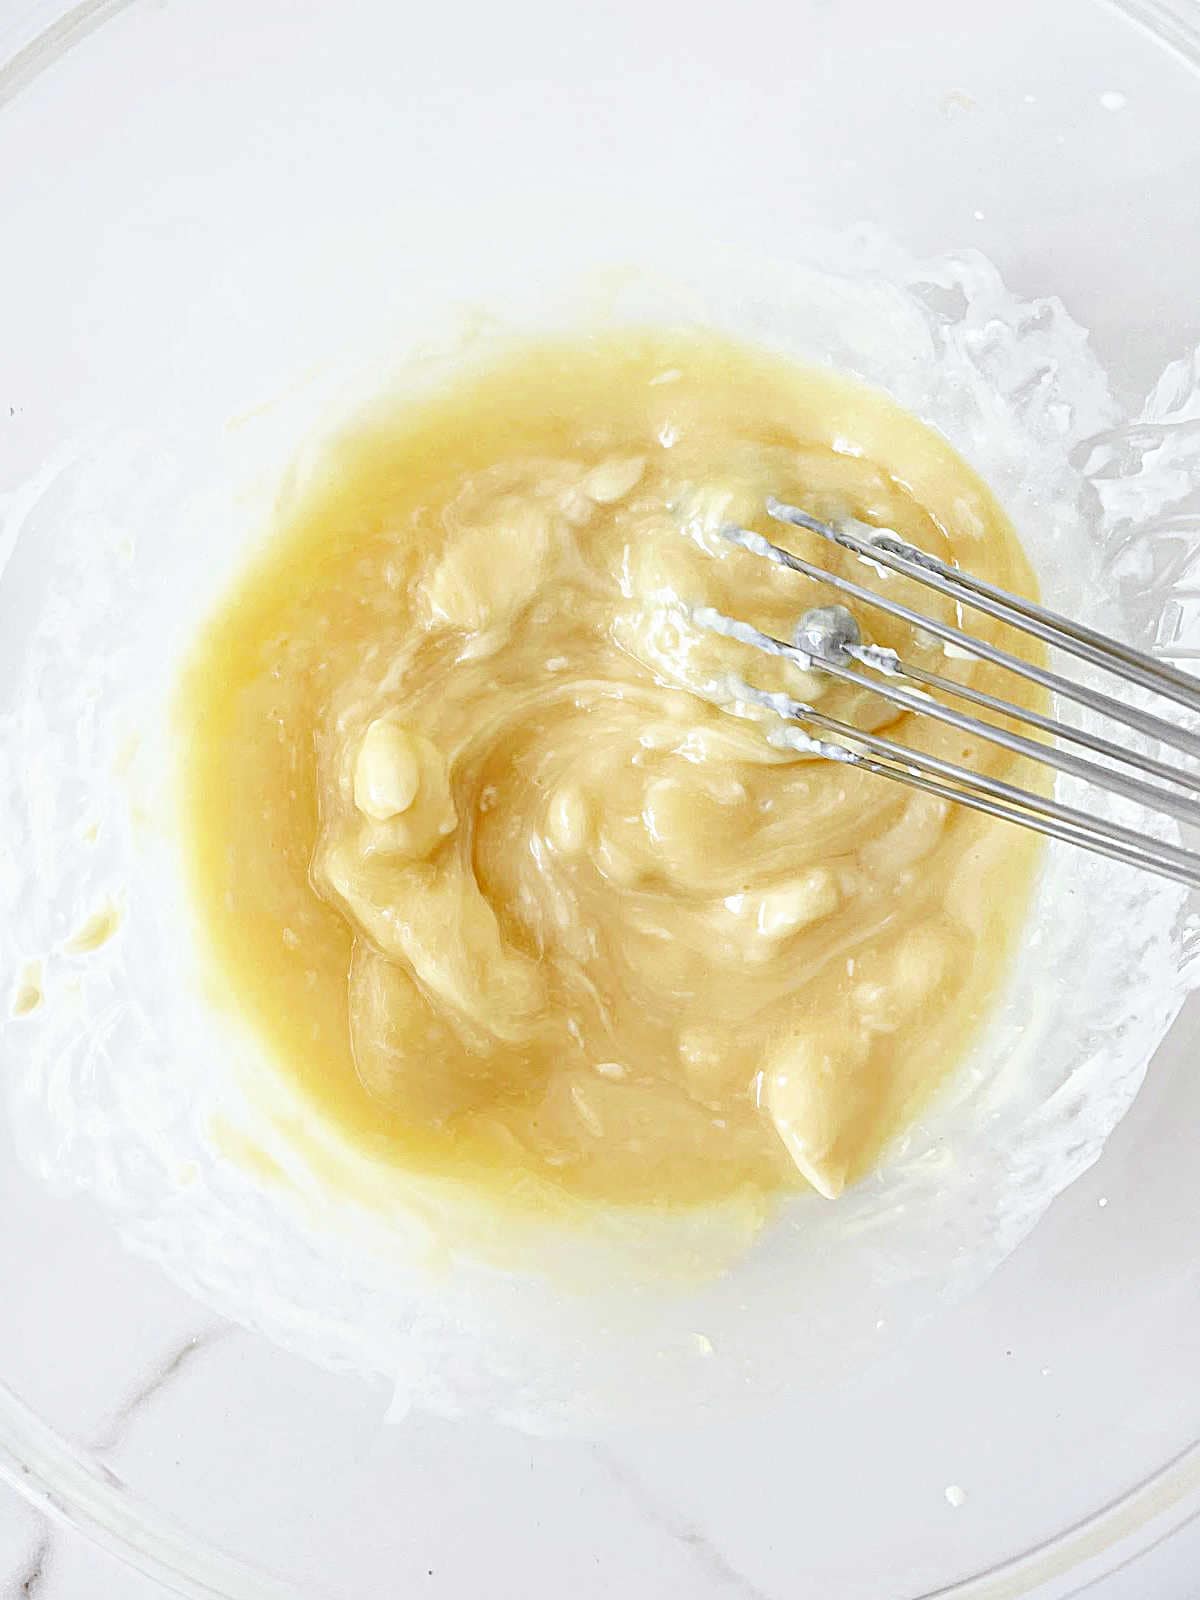 Stirring half melted white chocolate in a glass bowl on a white marbled surface.